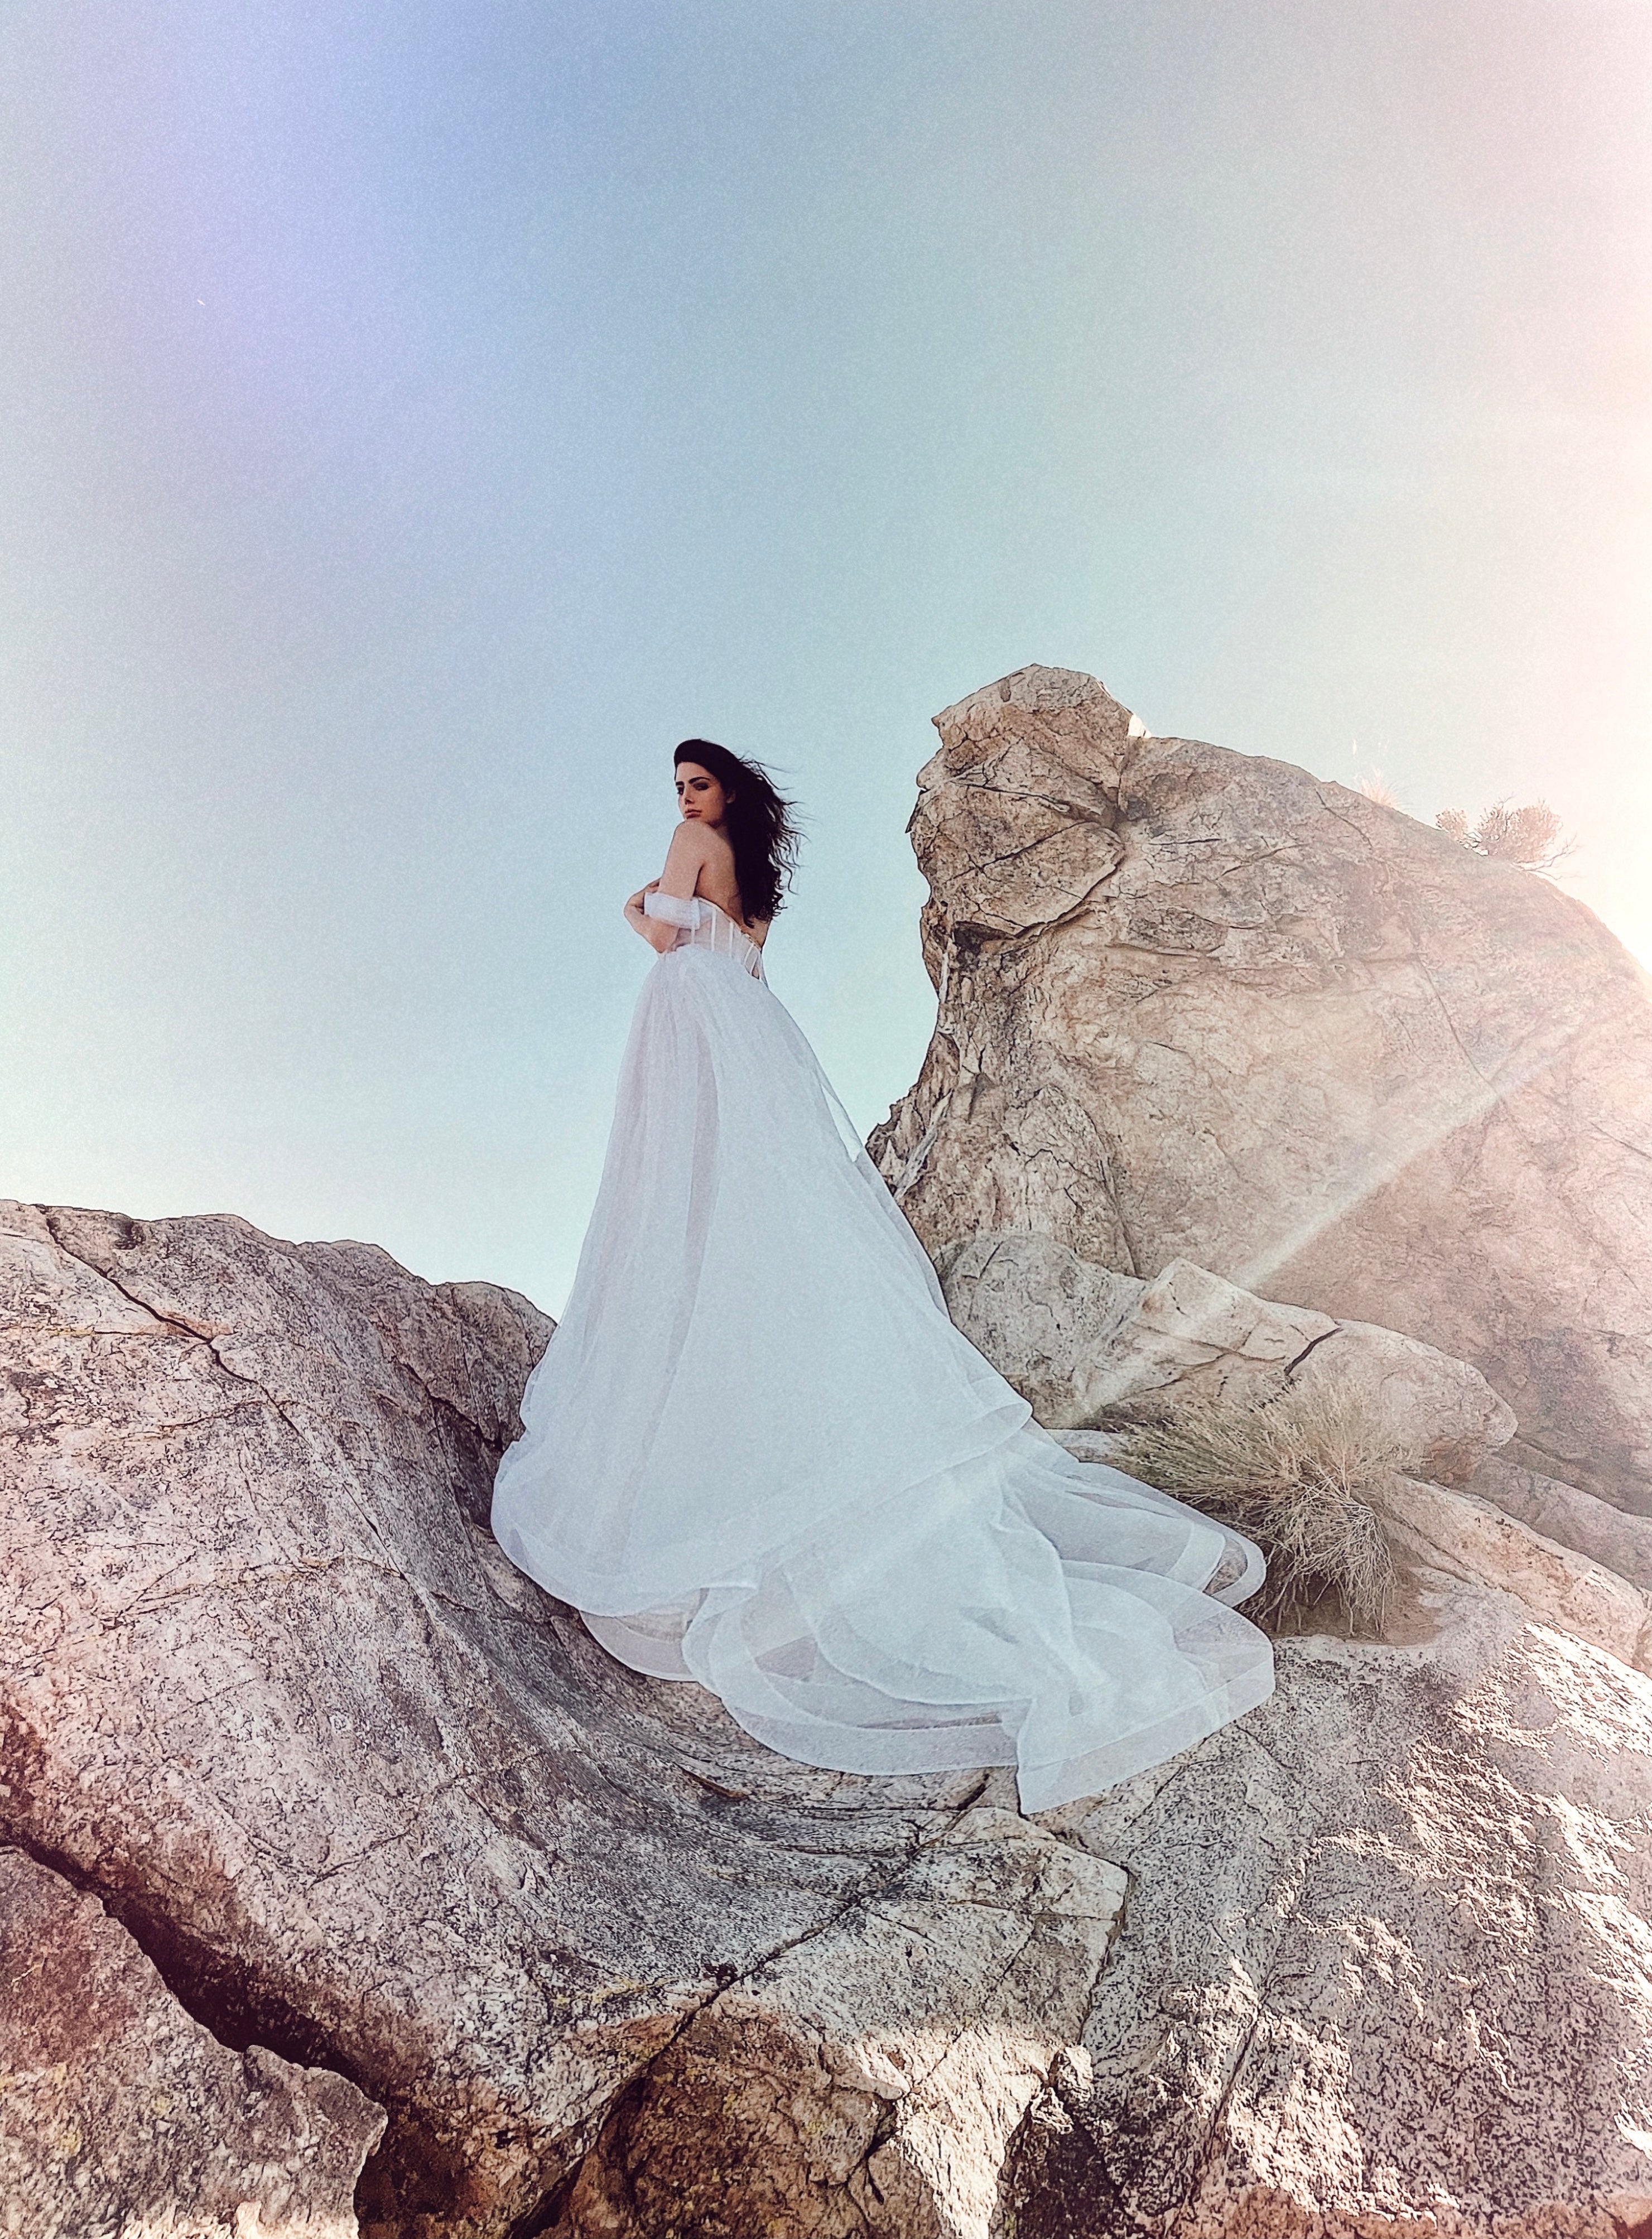 Sparkle wedding dress with sleeves and long train shot on rocks